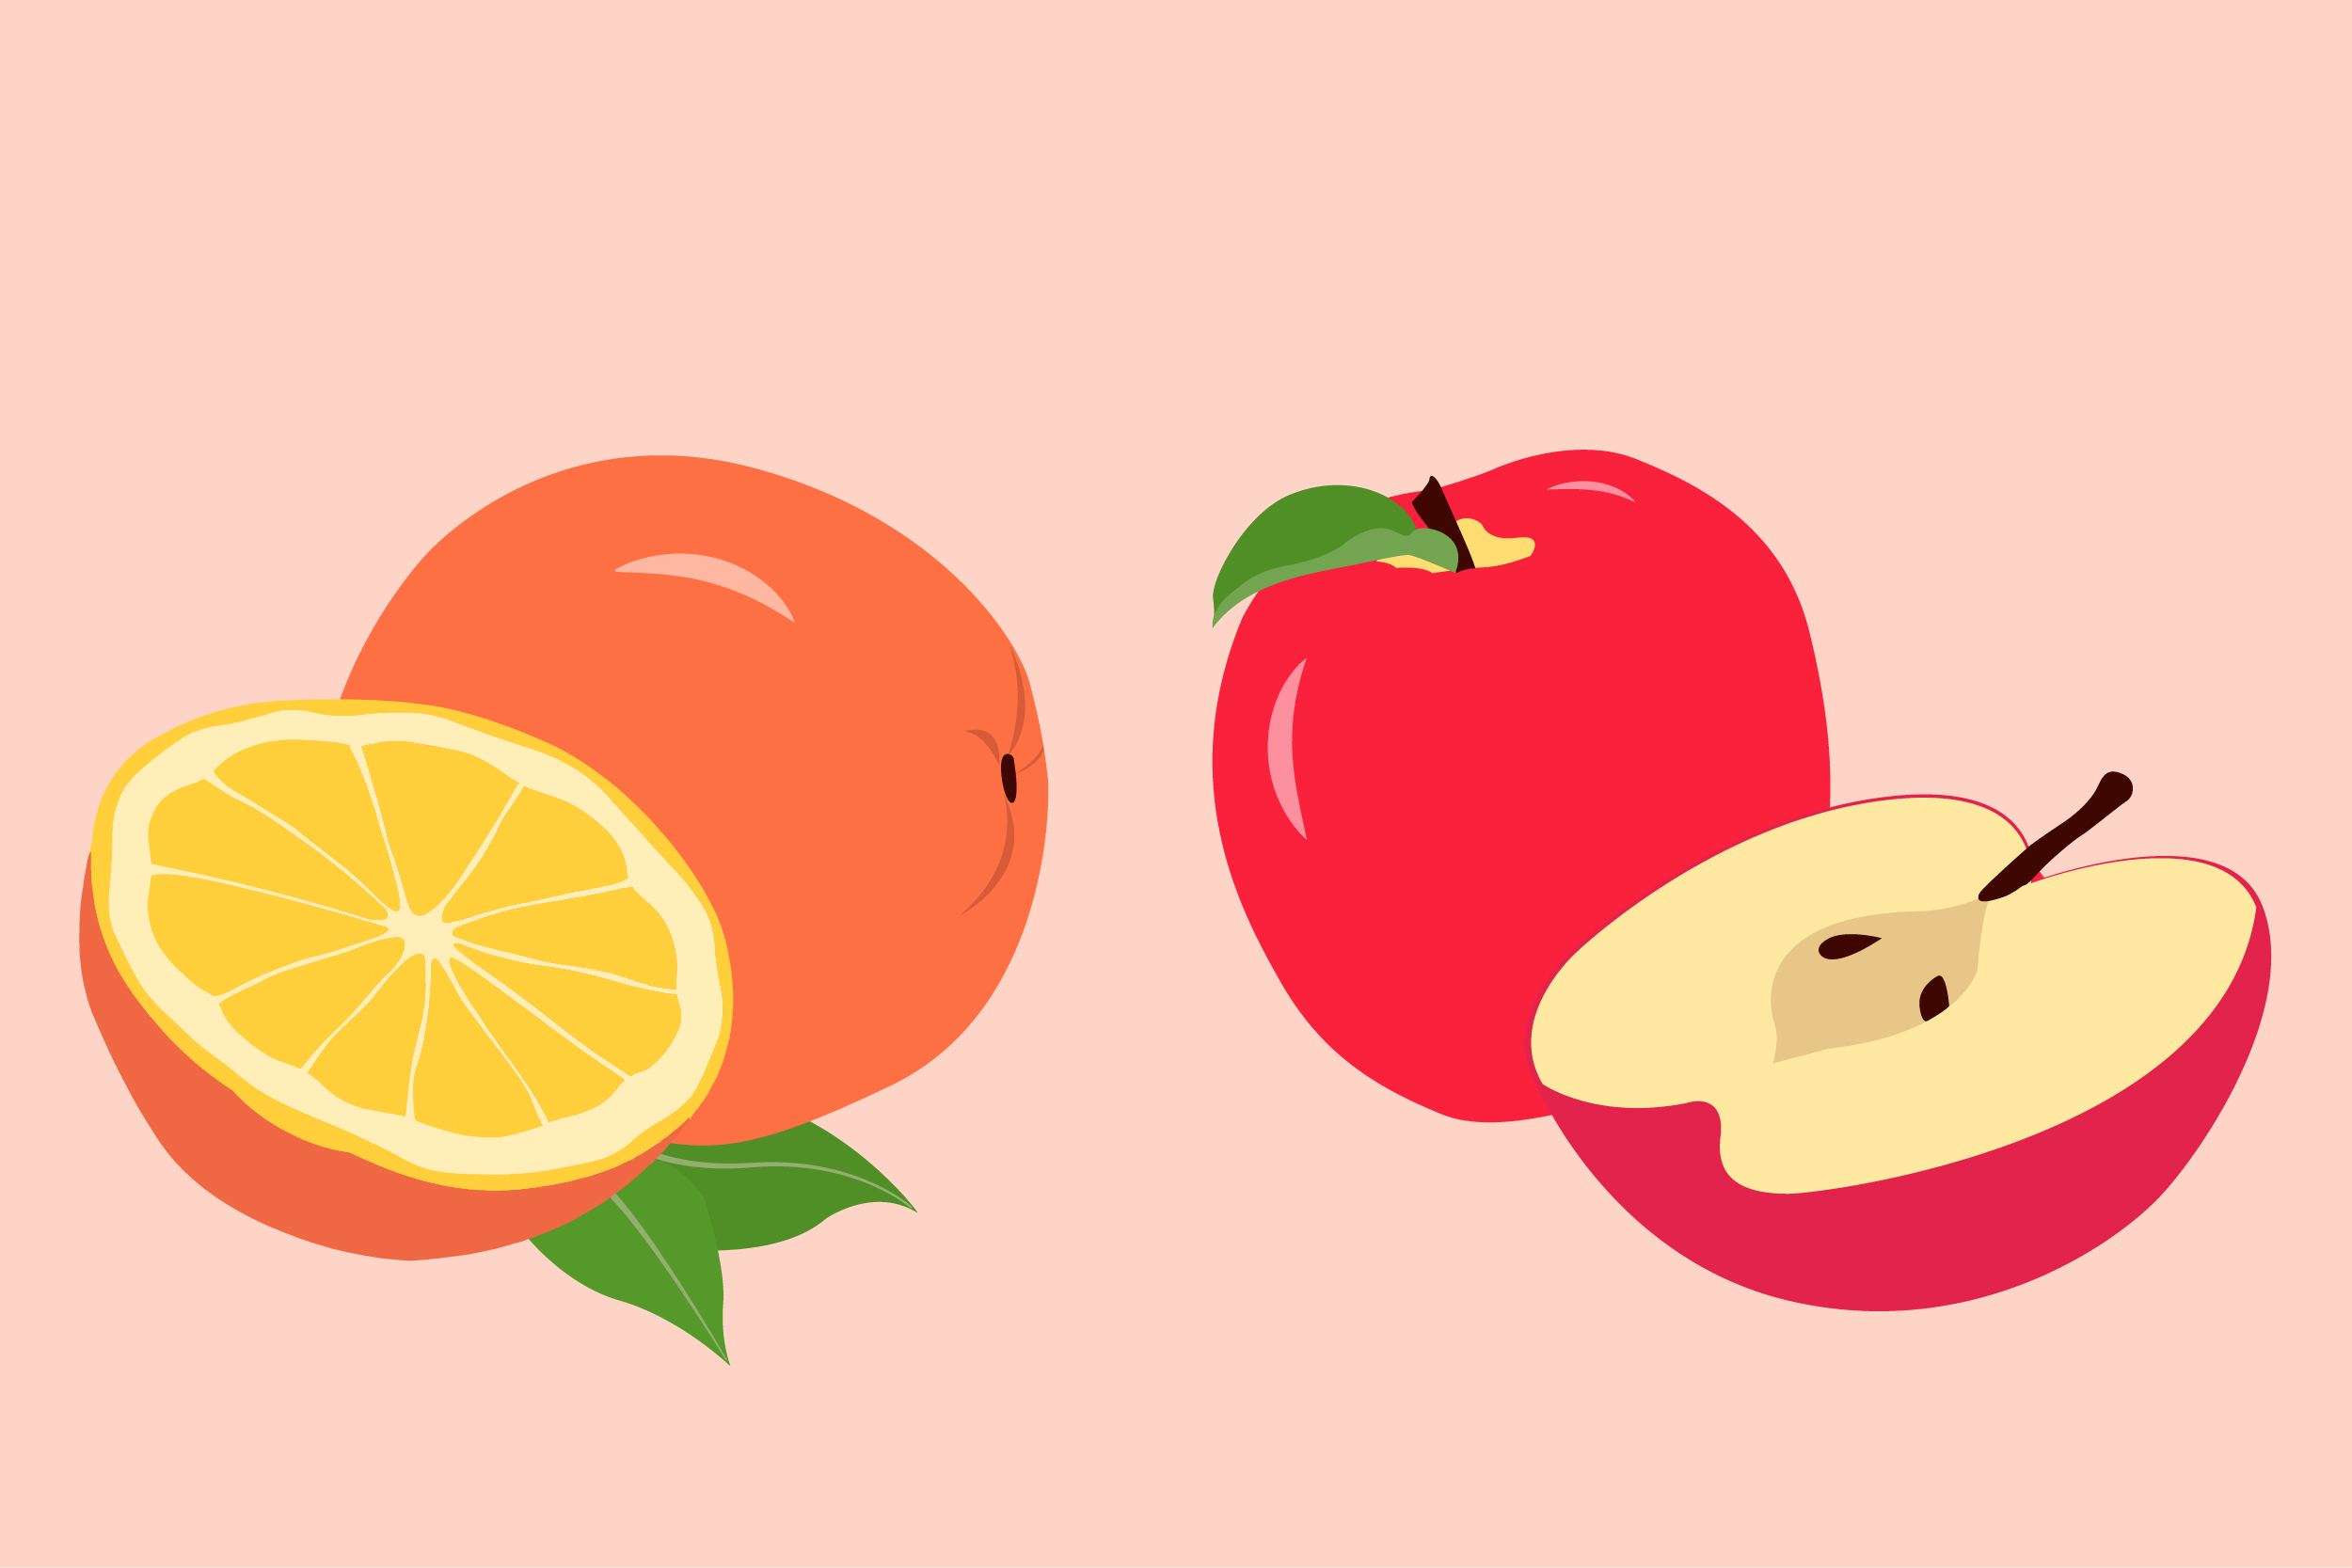 Are Apples Or Oranges Healthier? - The Warm Up